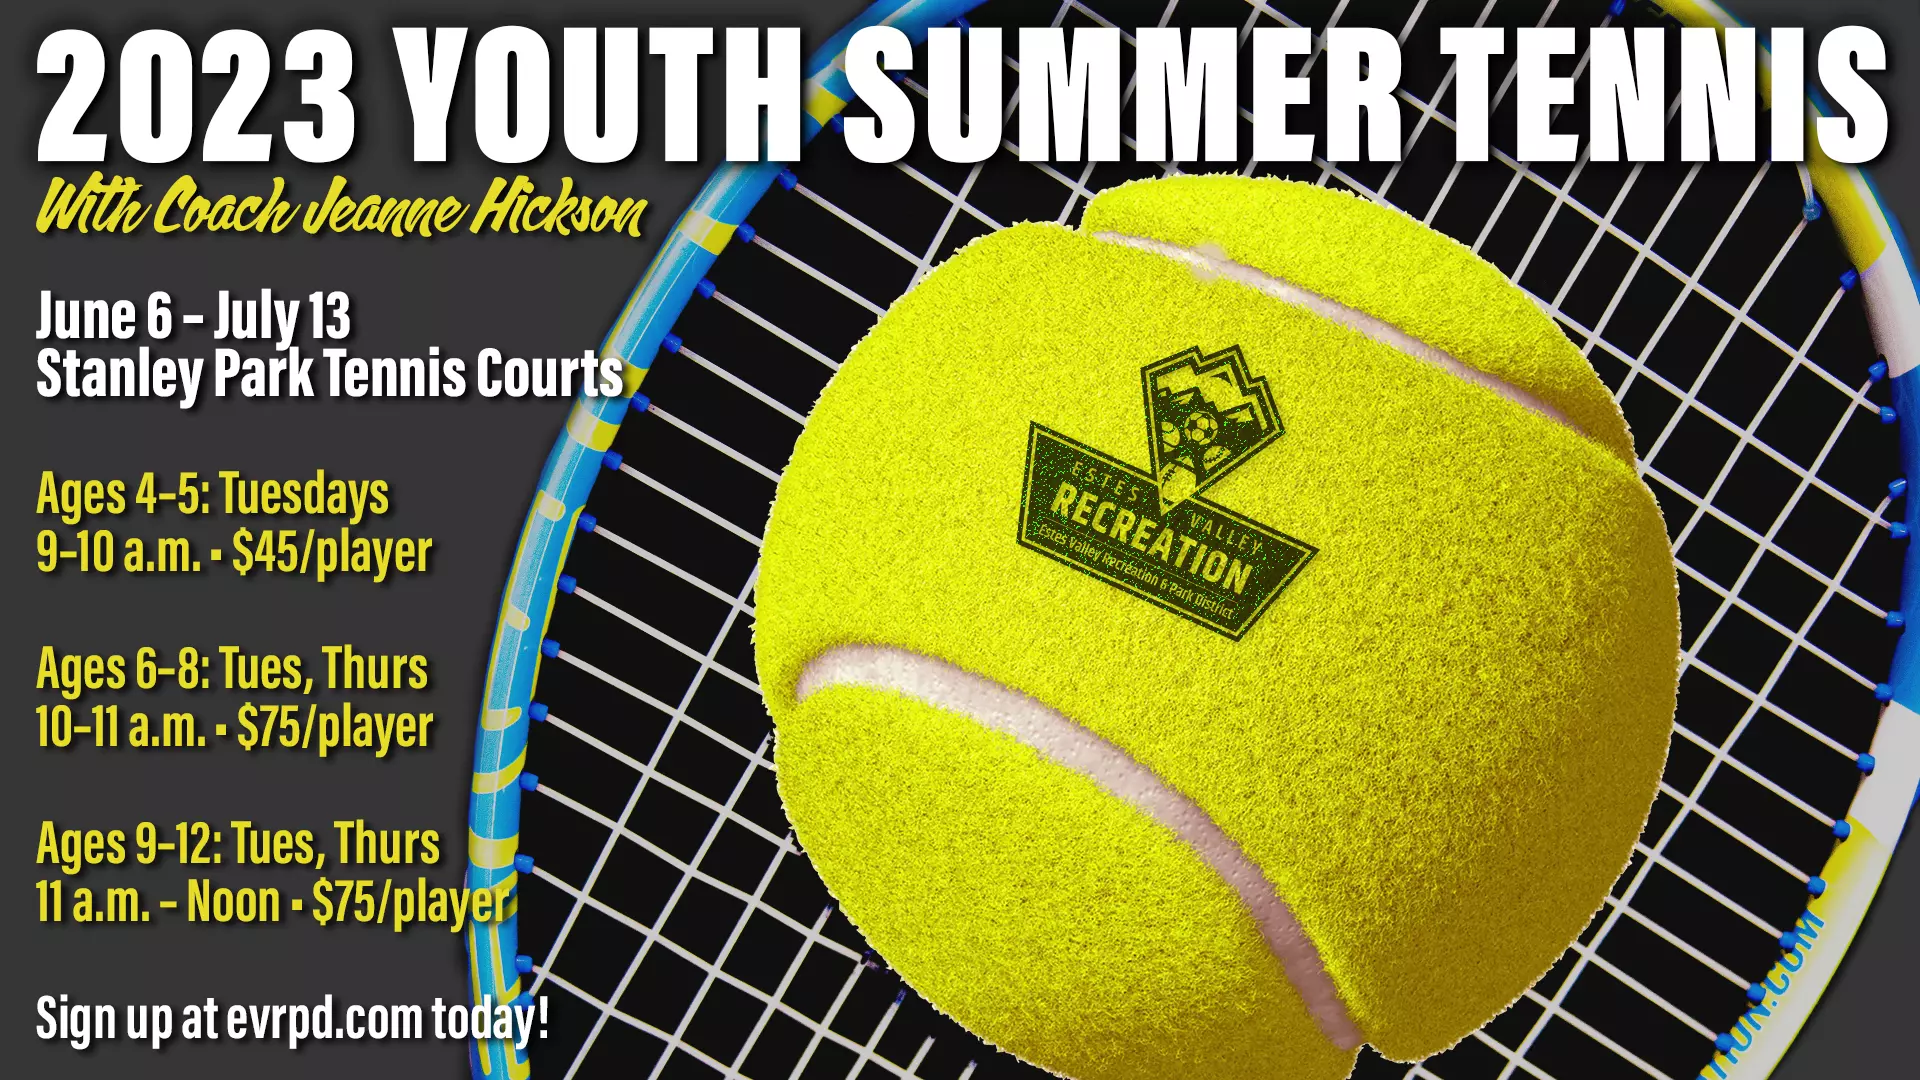 Youth Summer Tennis with Coach Jeanne Hickson